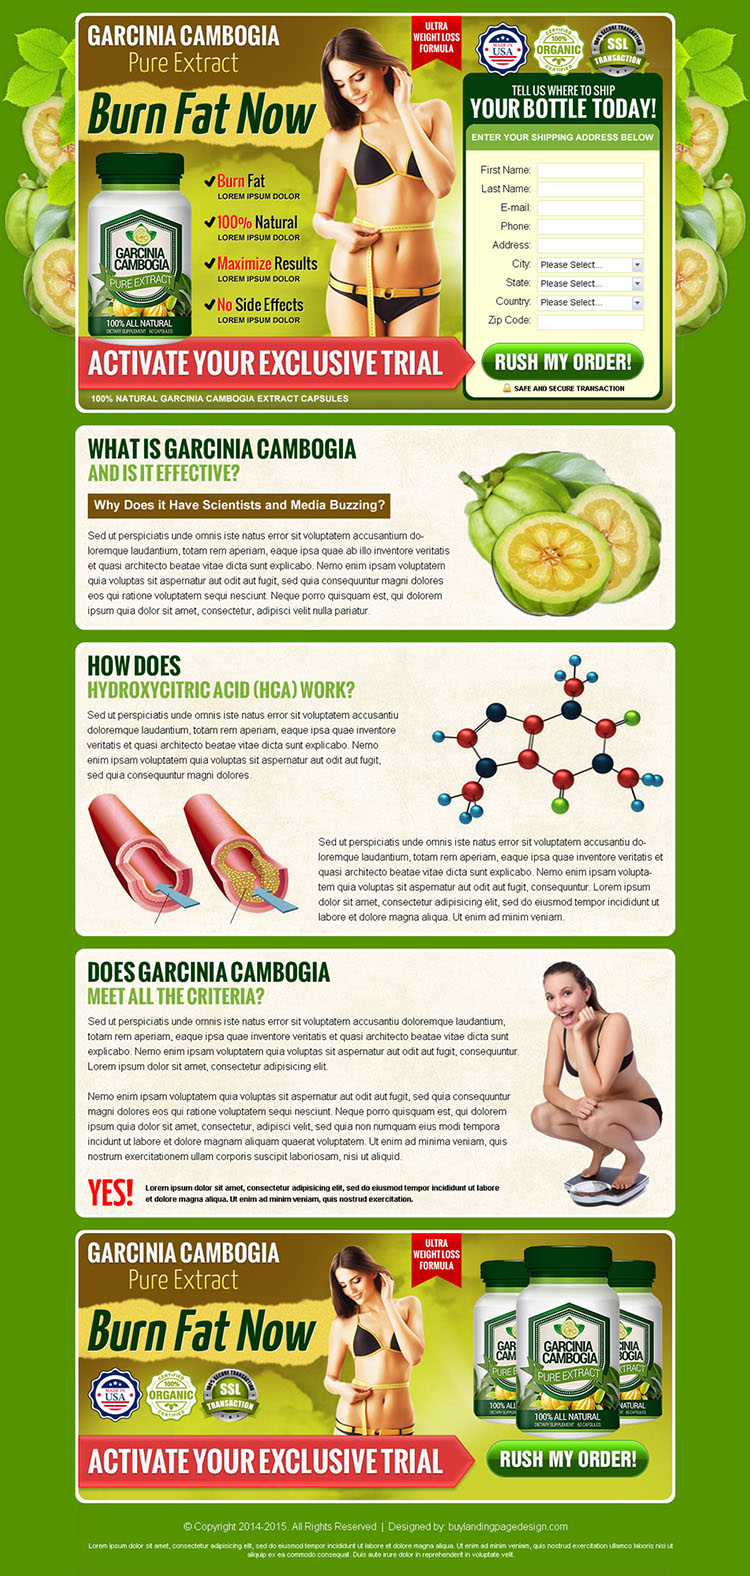 garcinia cambogia pure extract product selling lead capture landing page design templates